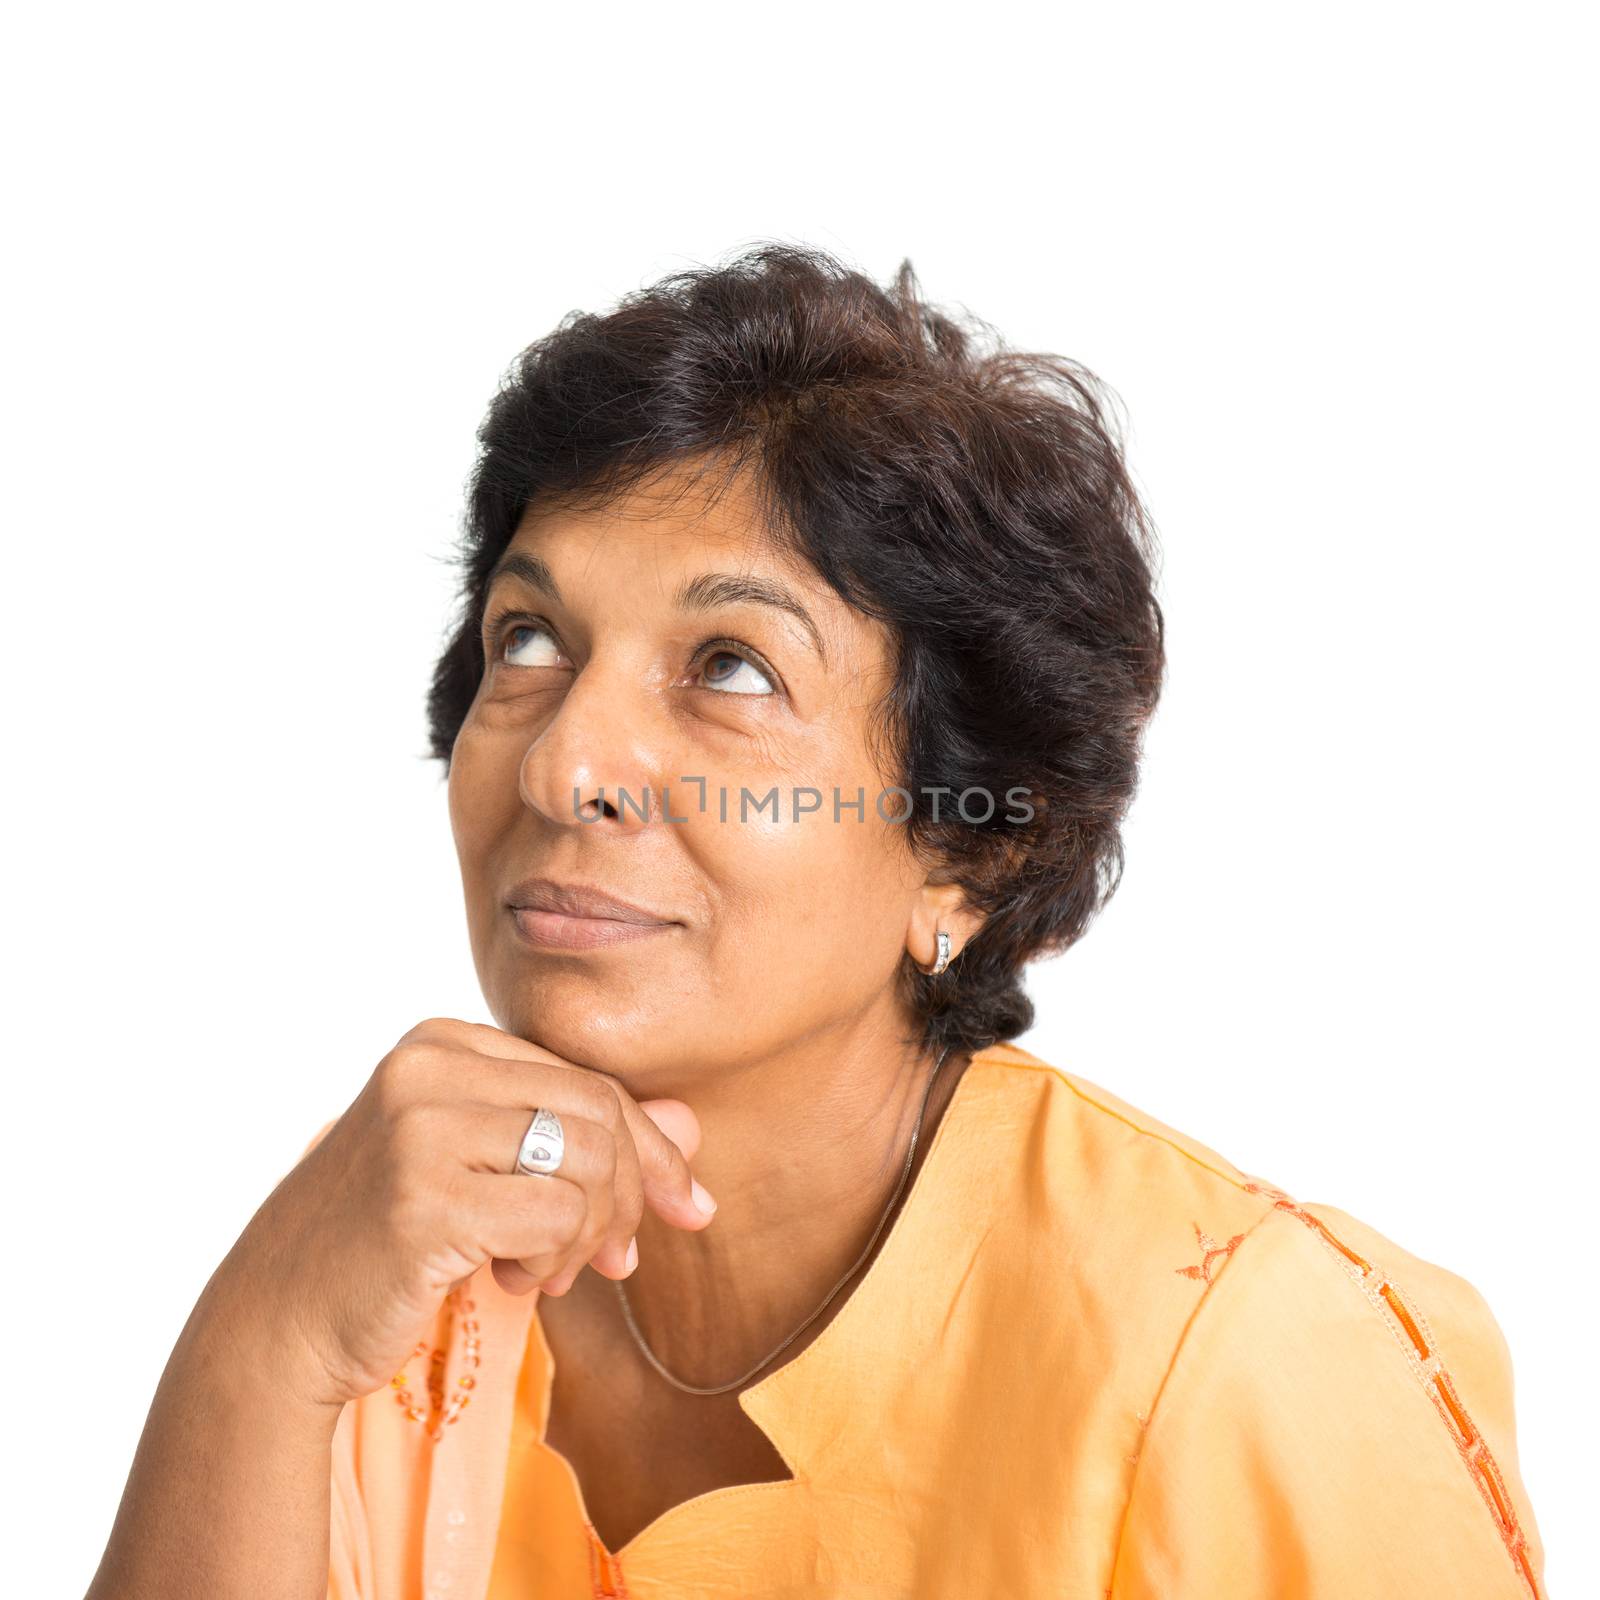 Portrait of a 50s Indian mature woman smiling and looking up having a thought, isolated on white background.